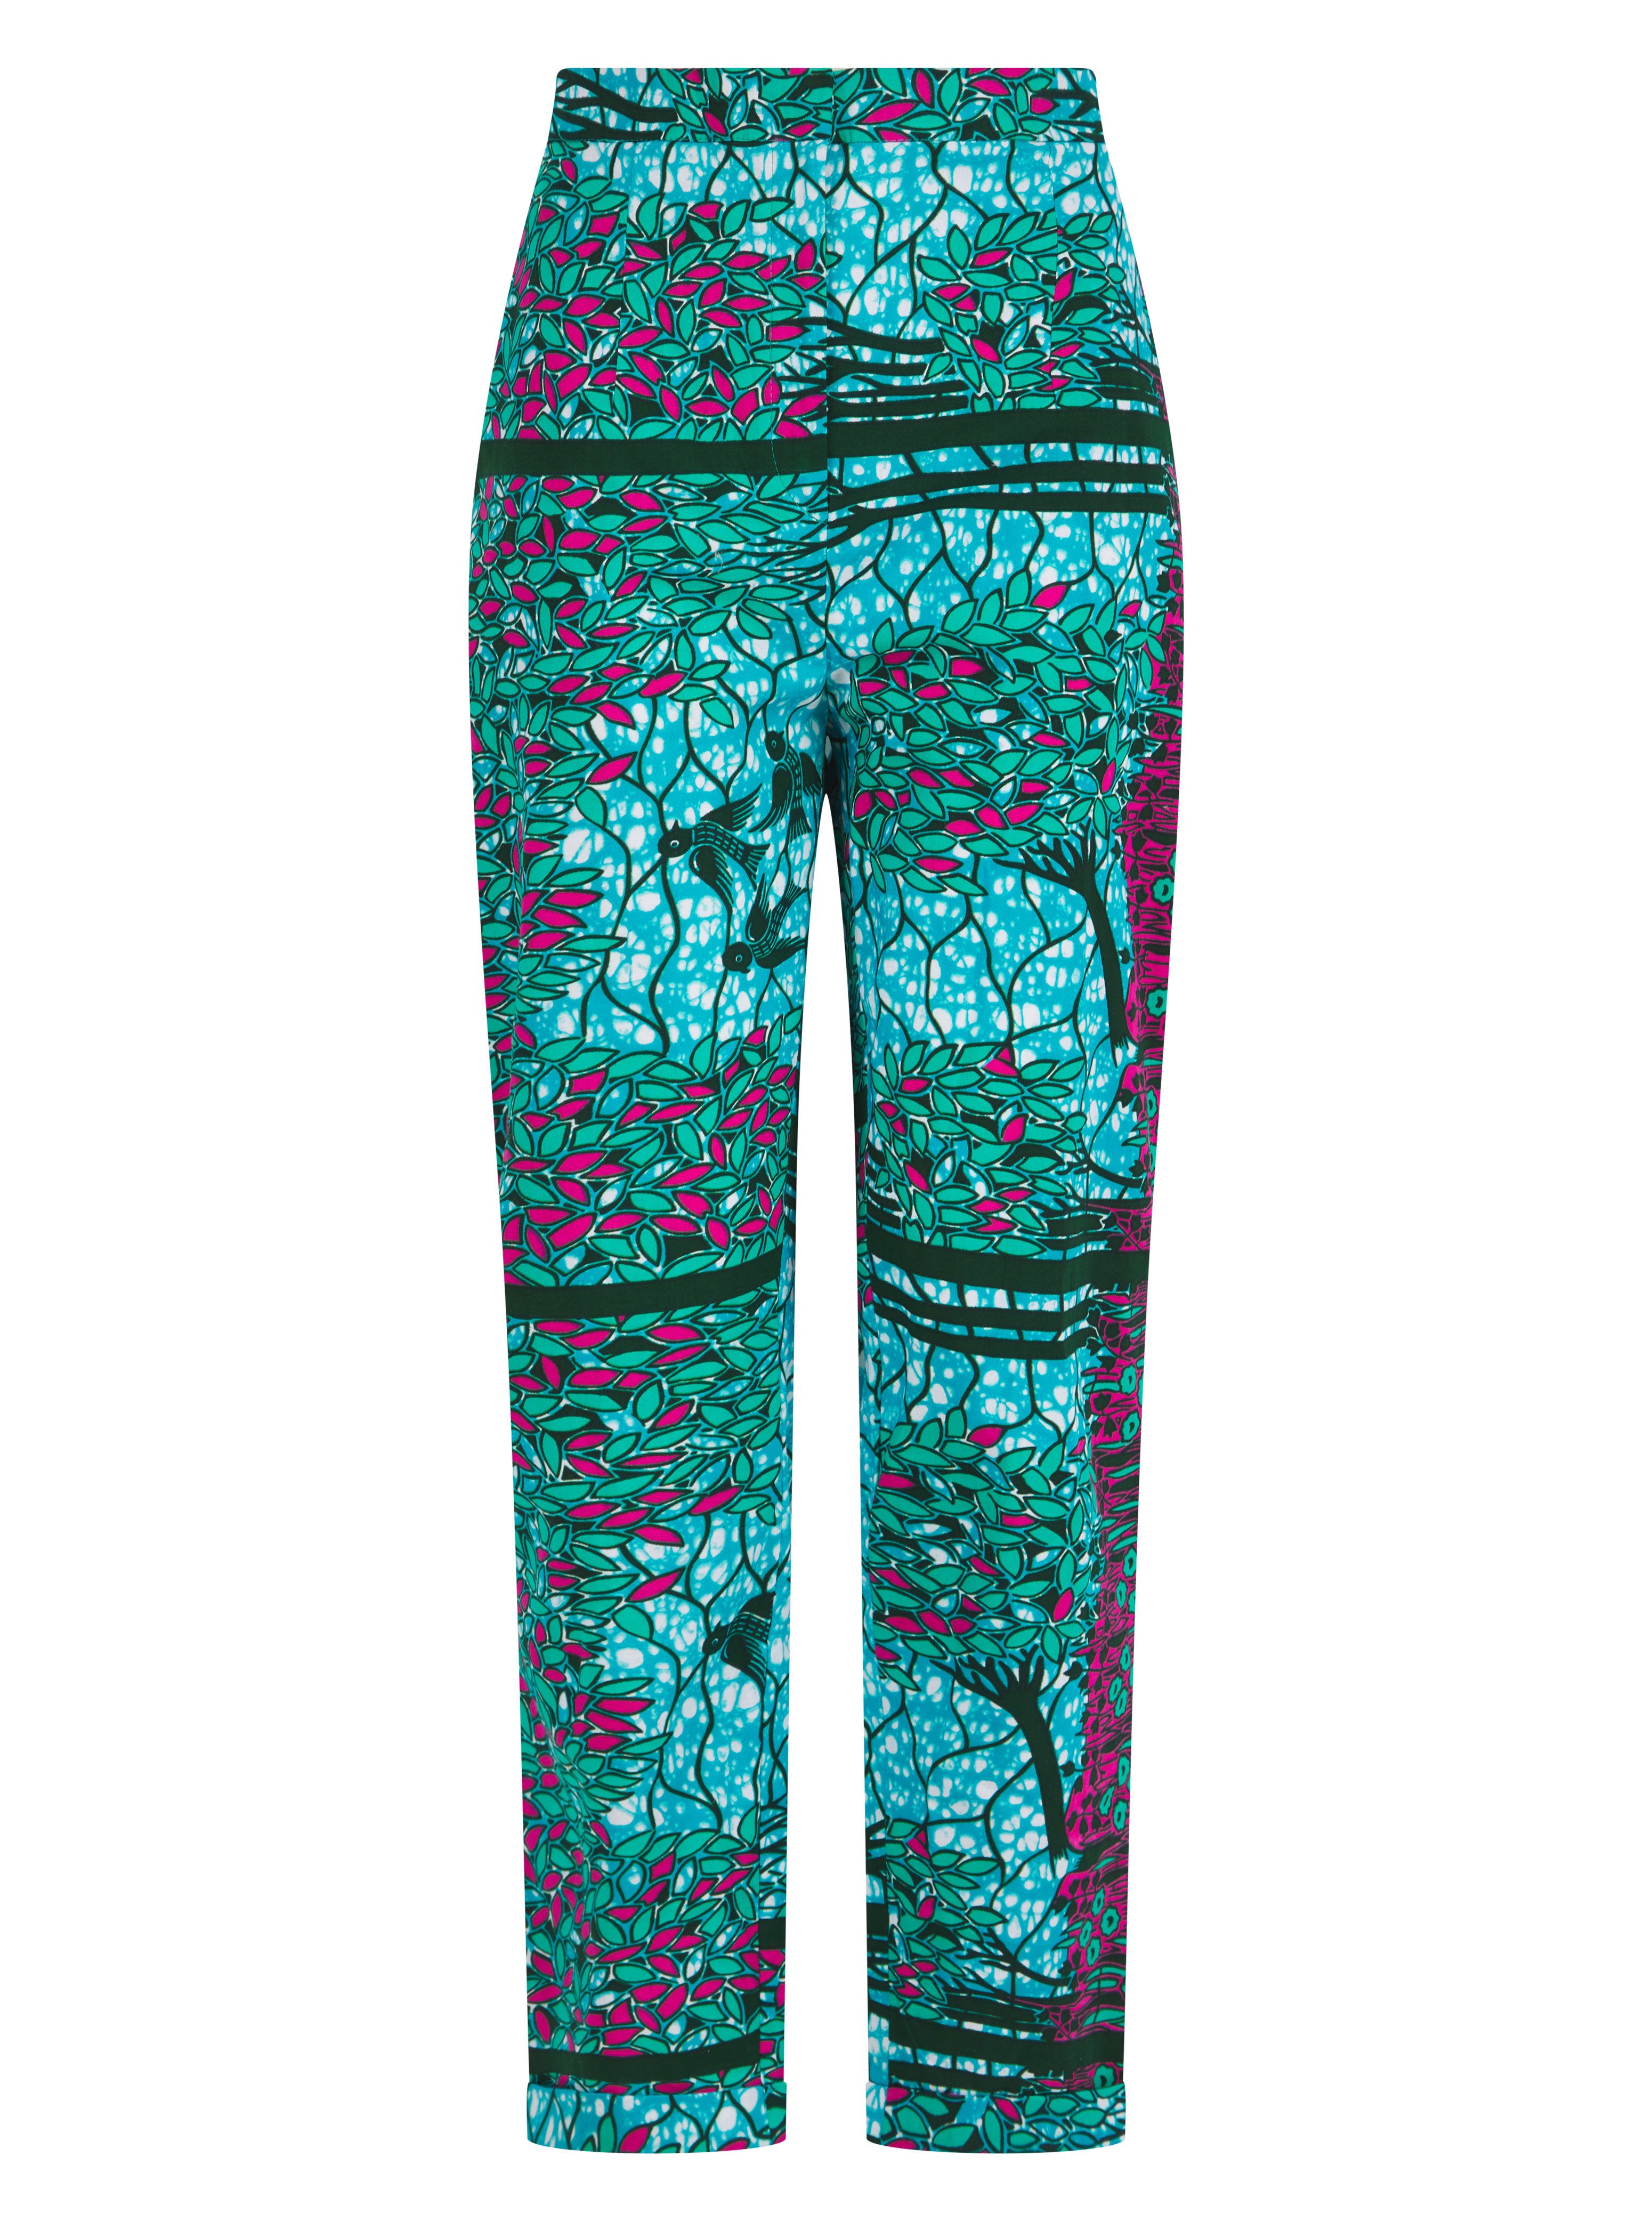 Patterned trousers - Light pink/Patterned - Ladies | H&M IN